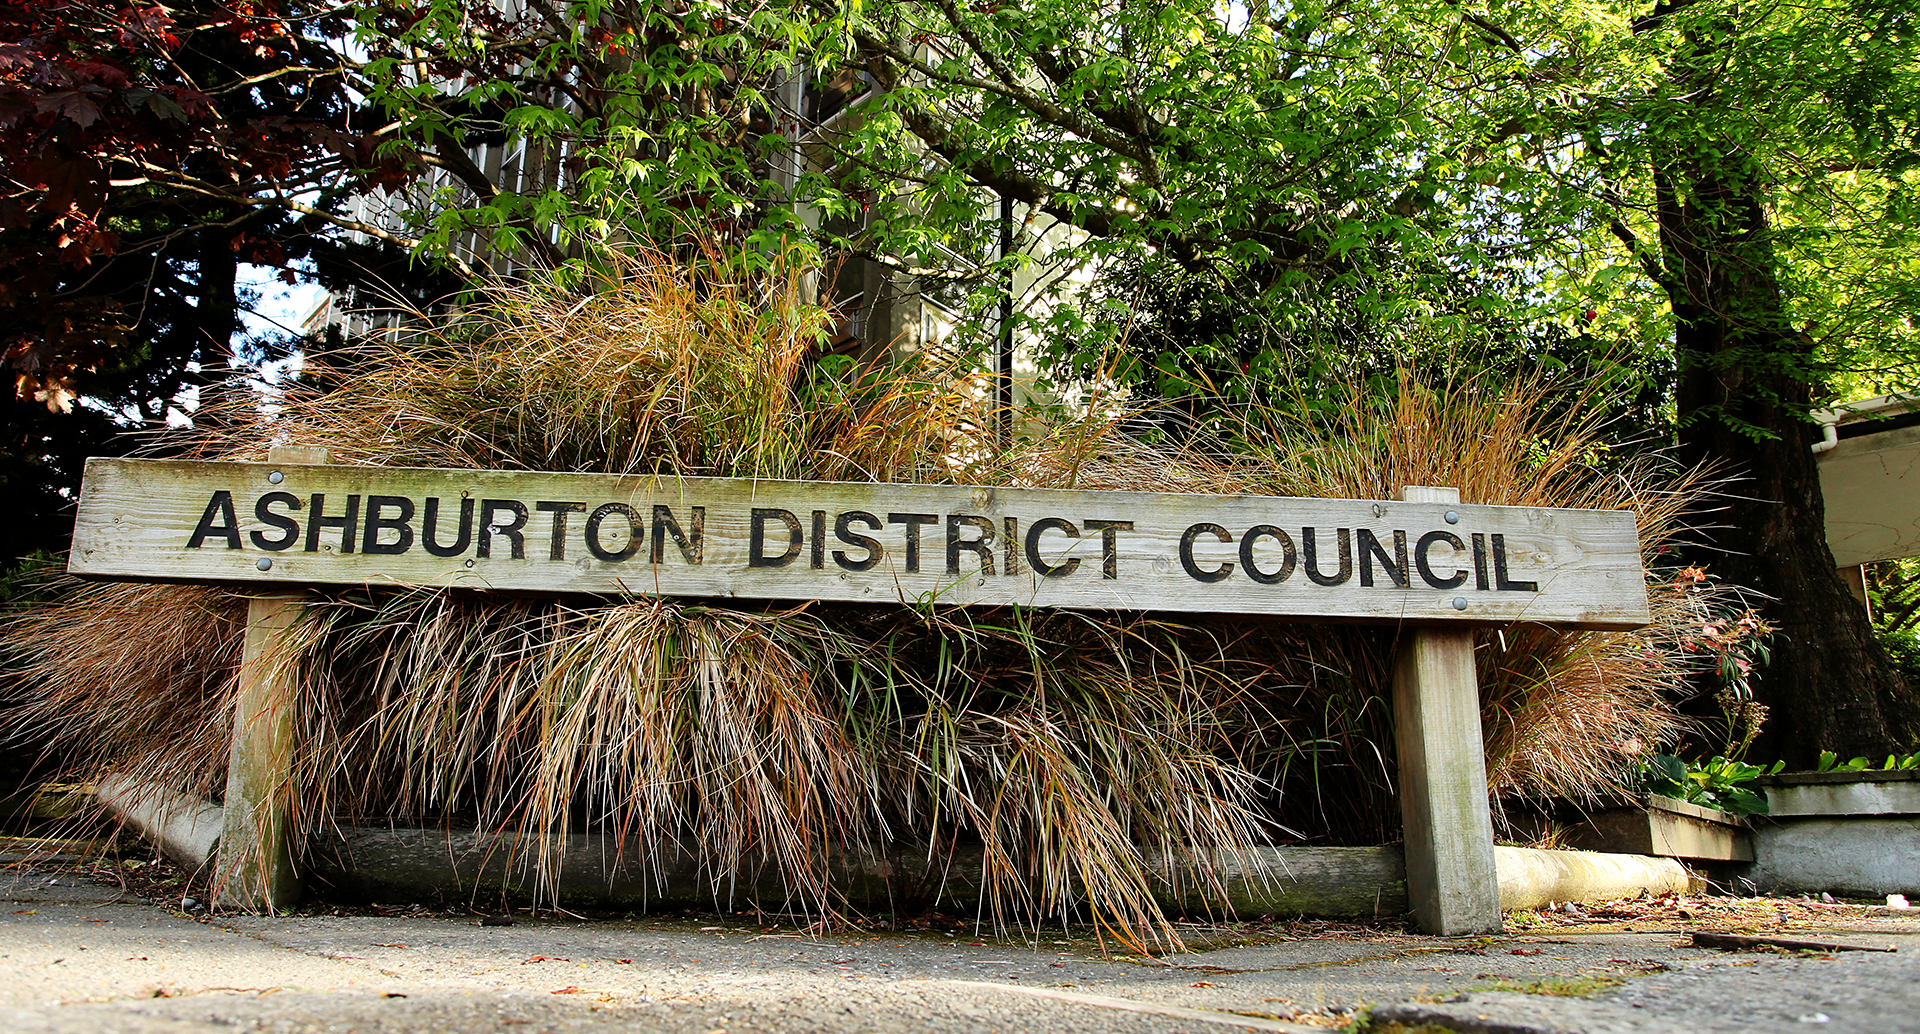 Sign for Council building